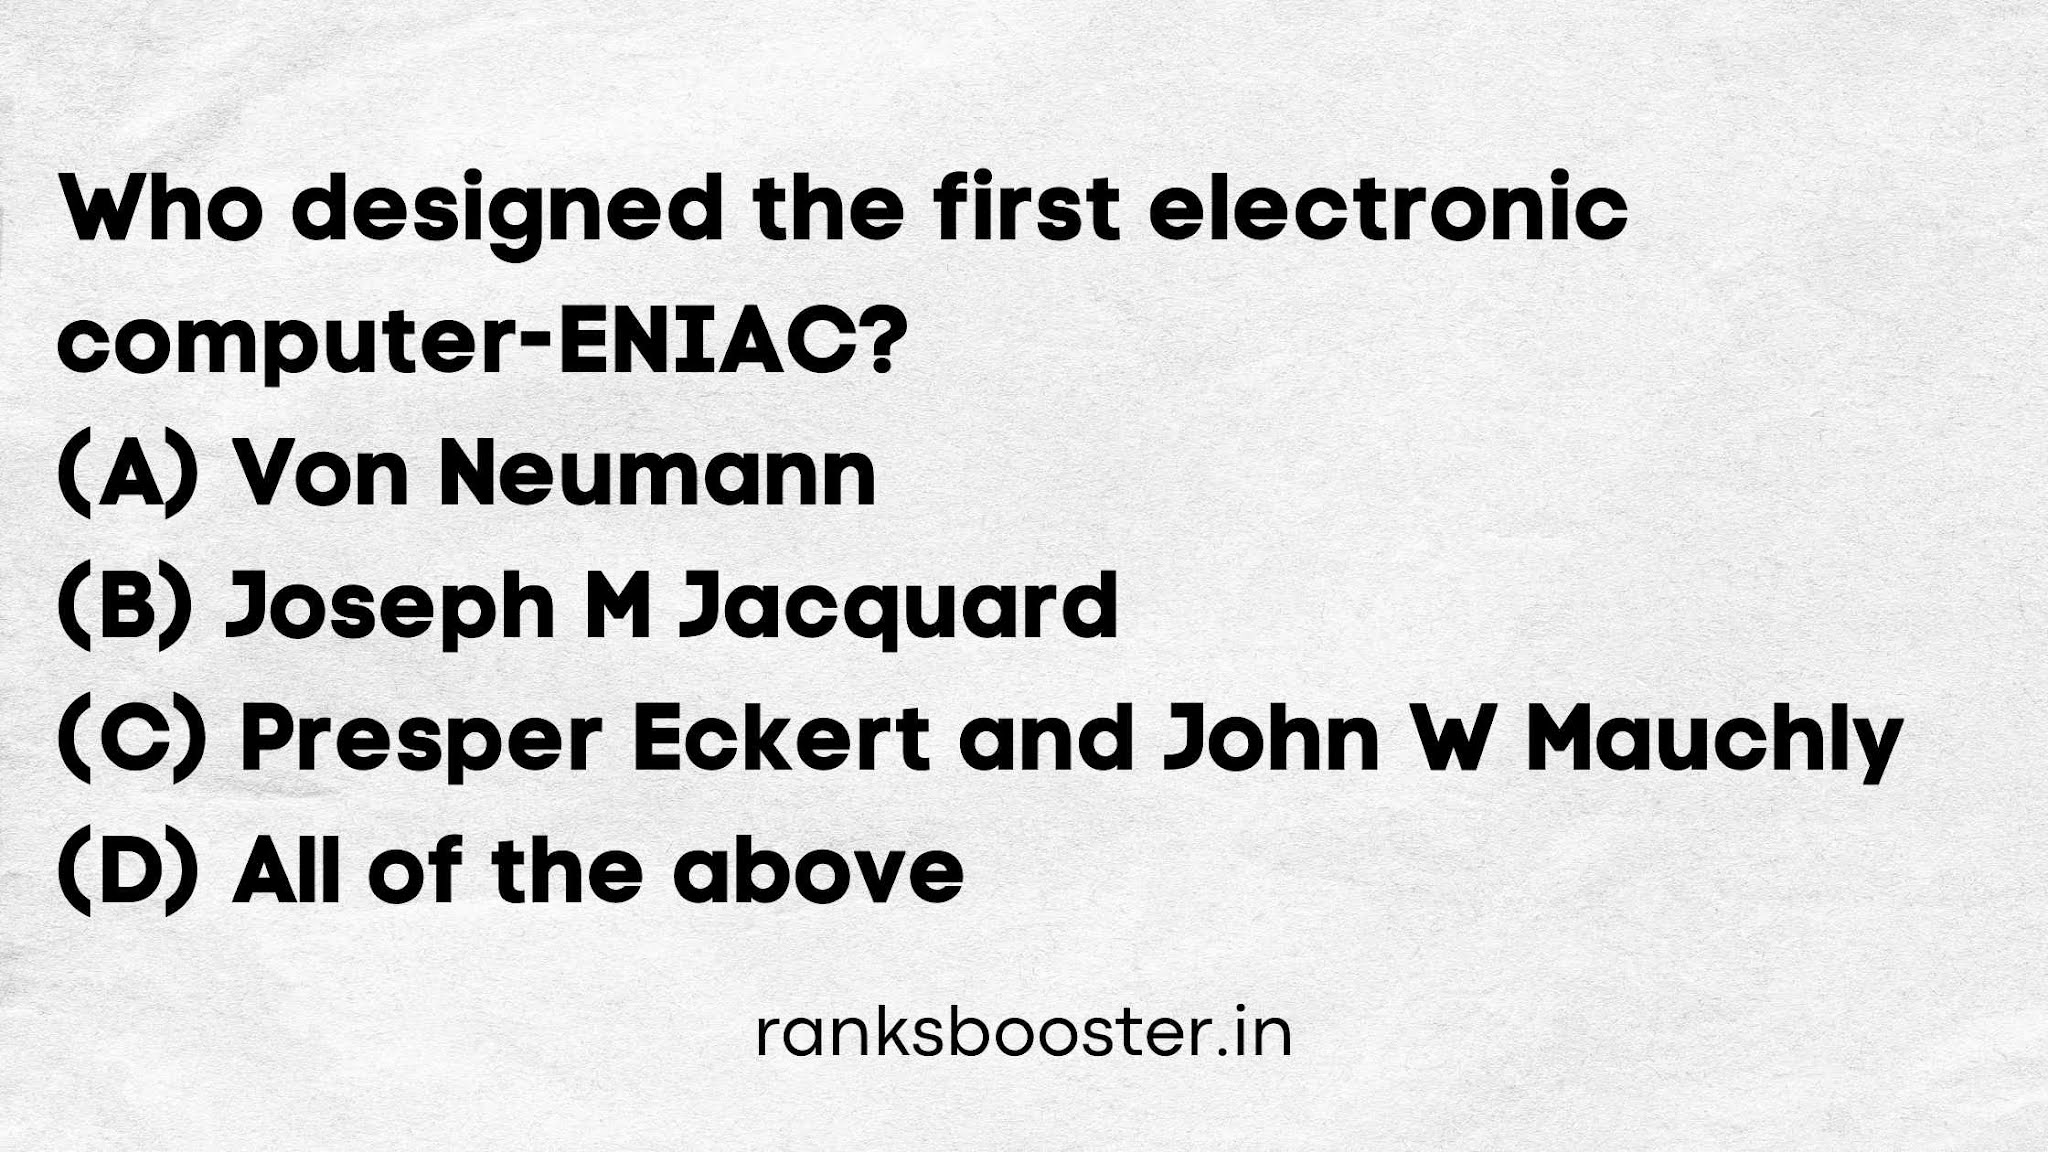 Who designed the first electronic computer-ENIAC?   (A) Von Neumann   (B) Joseph M Jacquard   (C) Presper Eckert and John W Mauchly   (D) All of the above